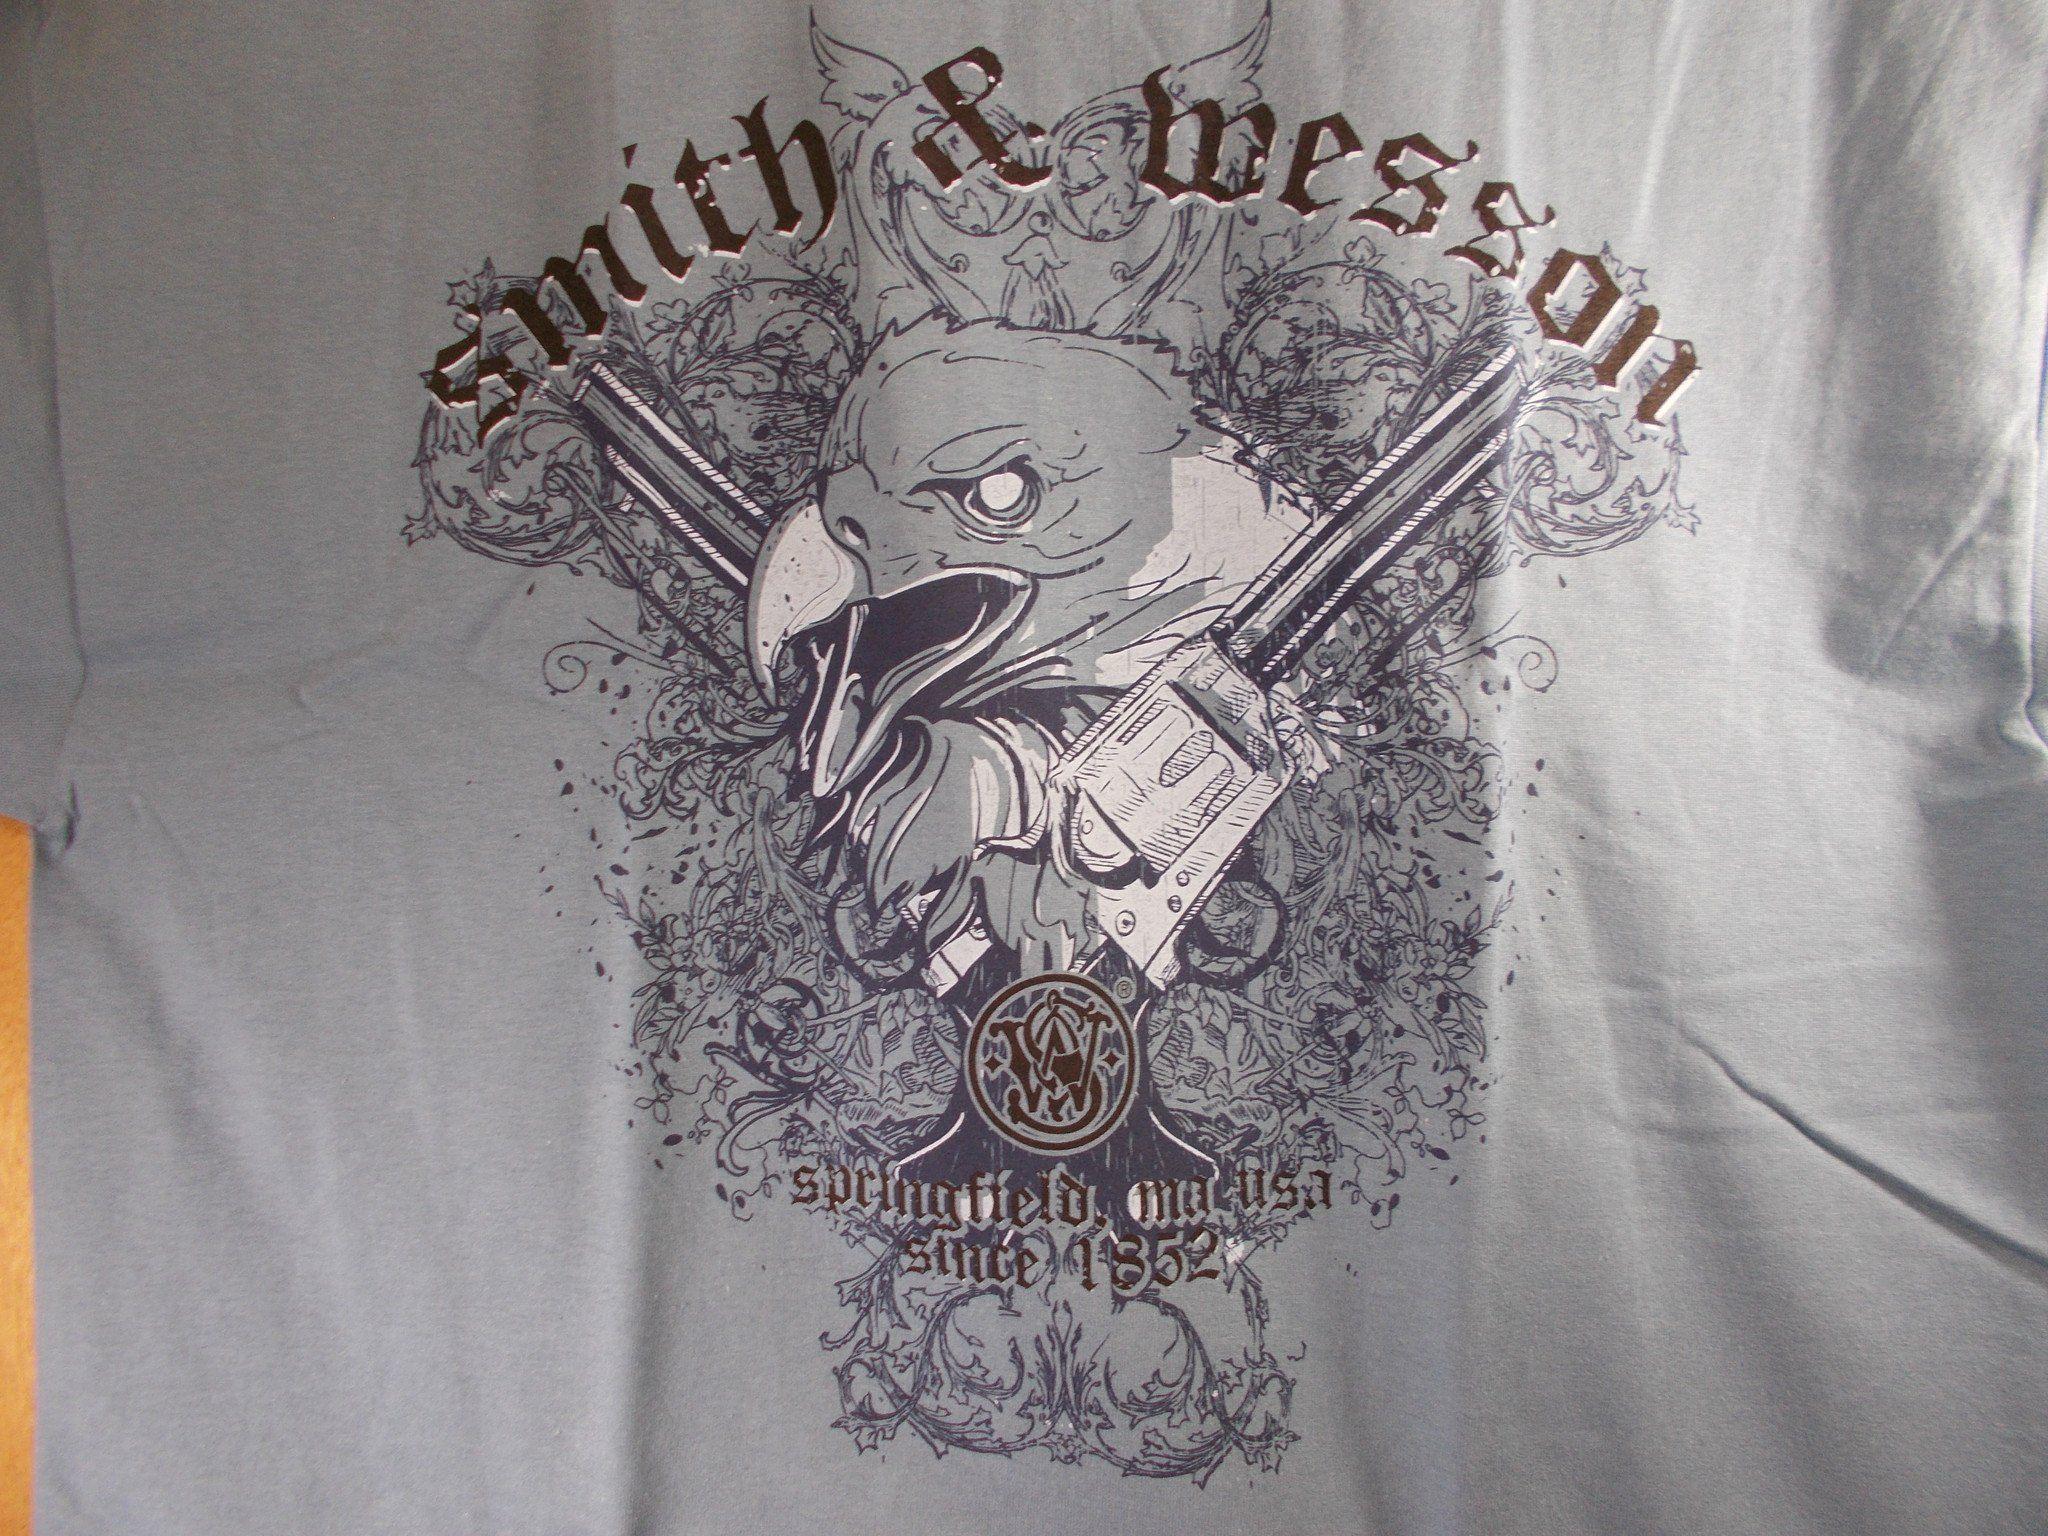 Light Blue Eagle Logo - TS015 Smith & Wesson New T-Shirt With Light Blue Eagle Head In ...